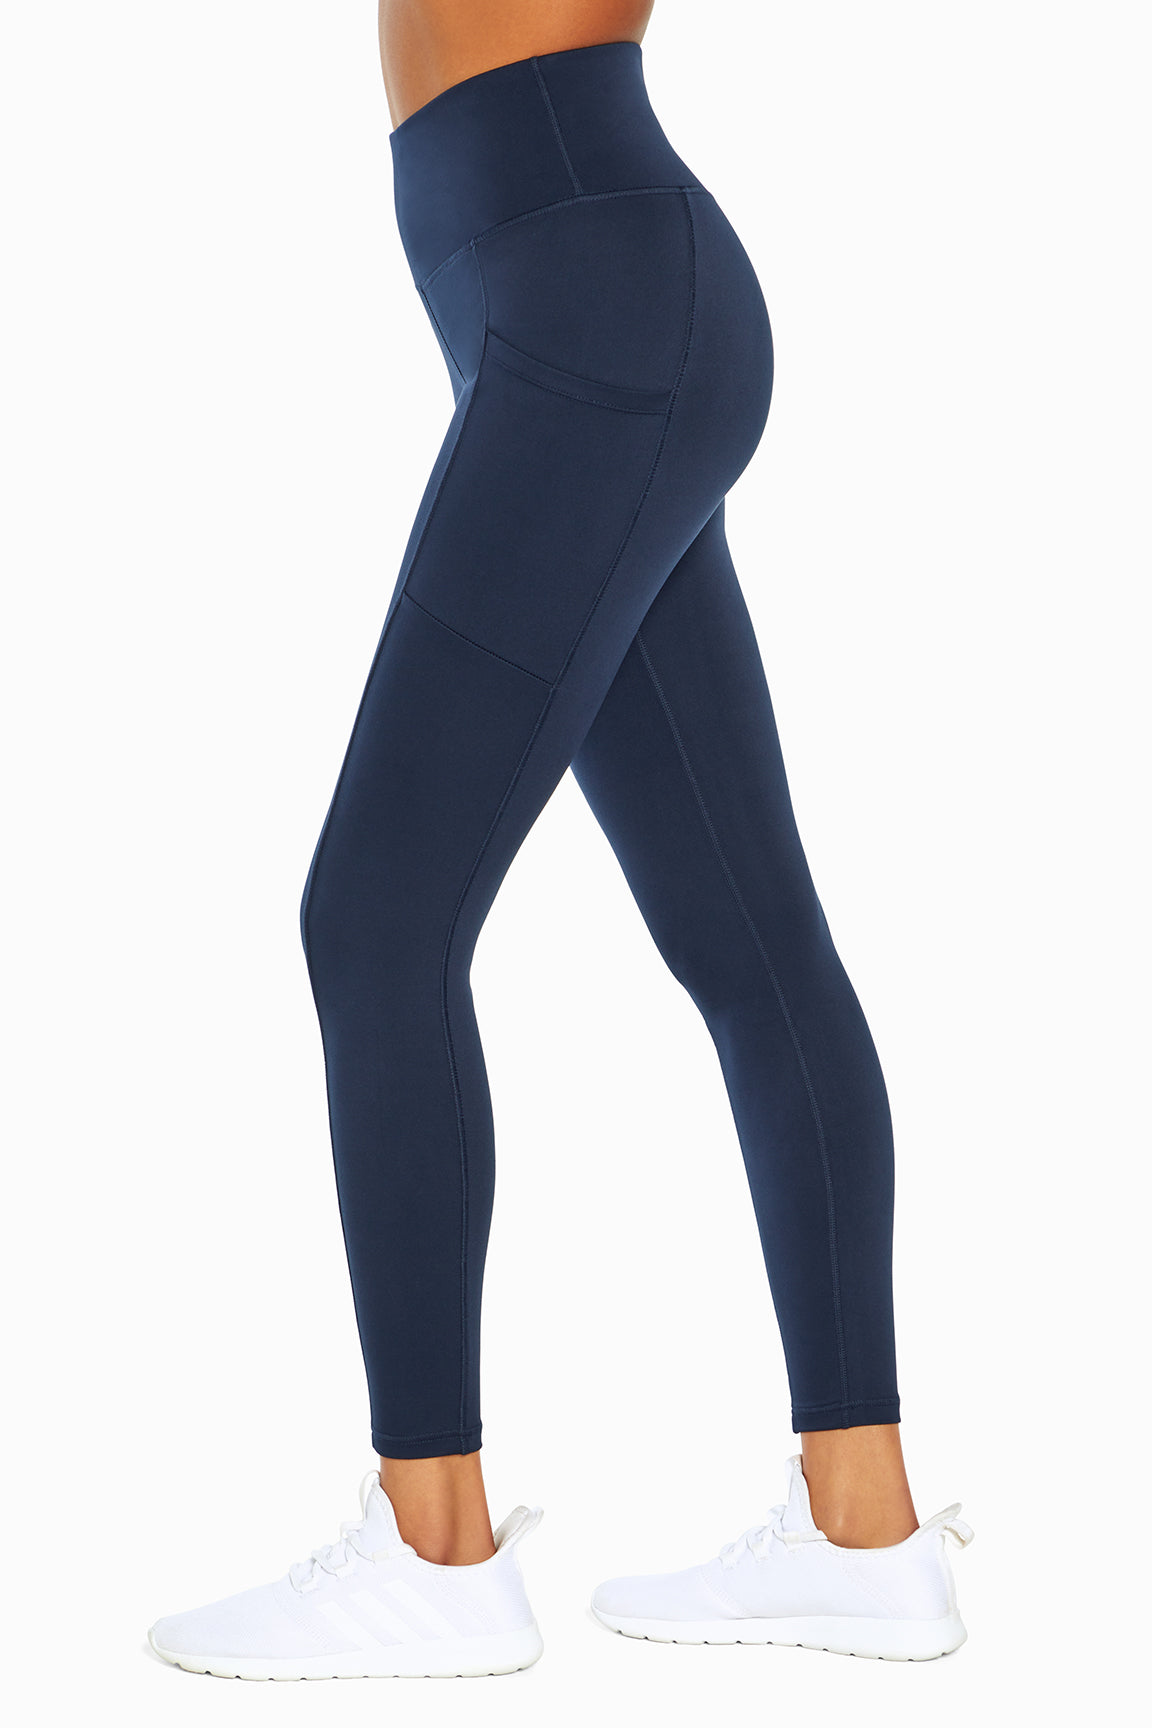 Soft Surroundings Colorful Metro Leggings Button Midnight Teal Blue Size  Medium - $43 - From Kat